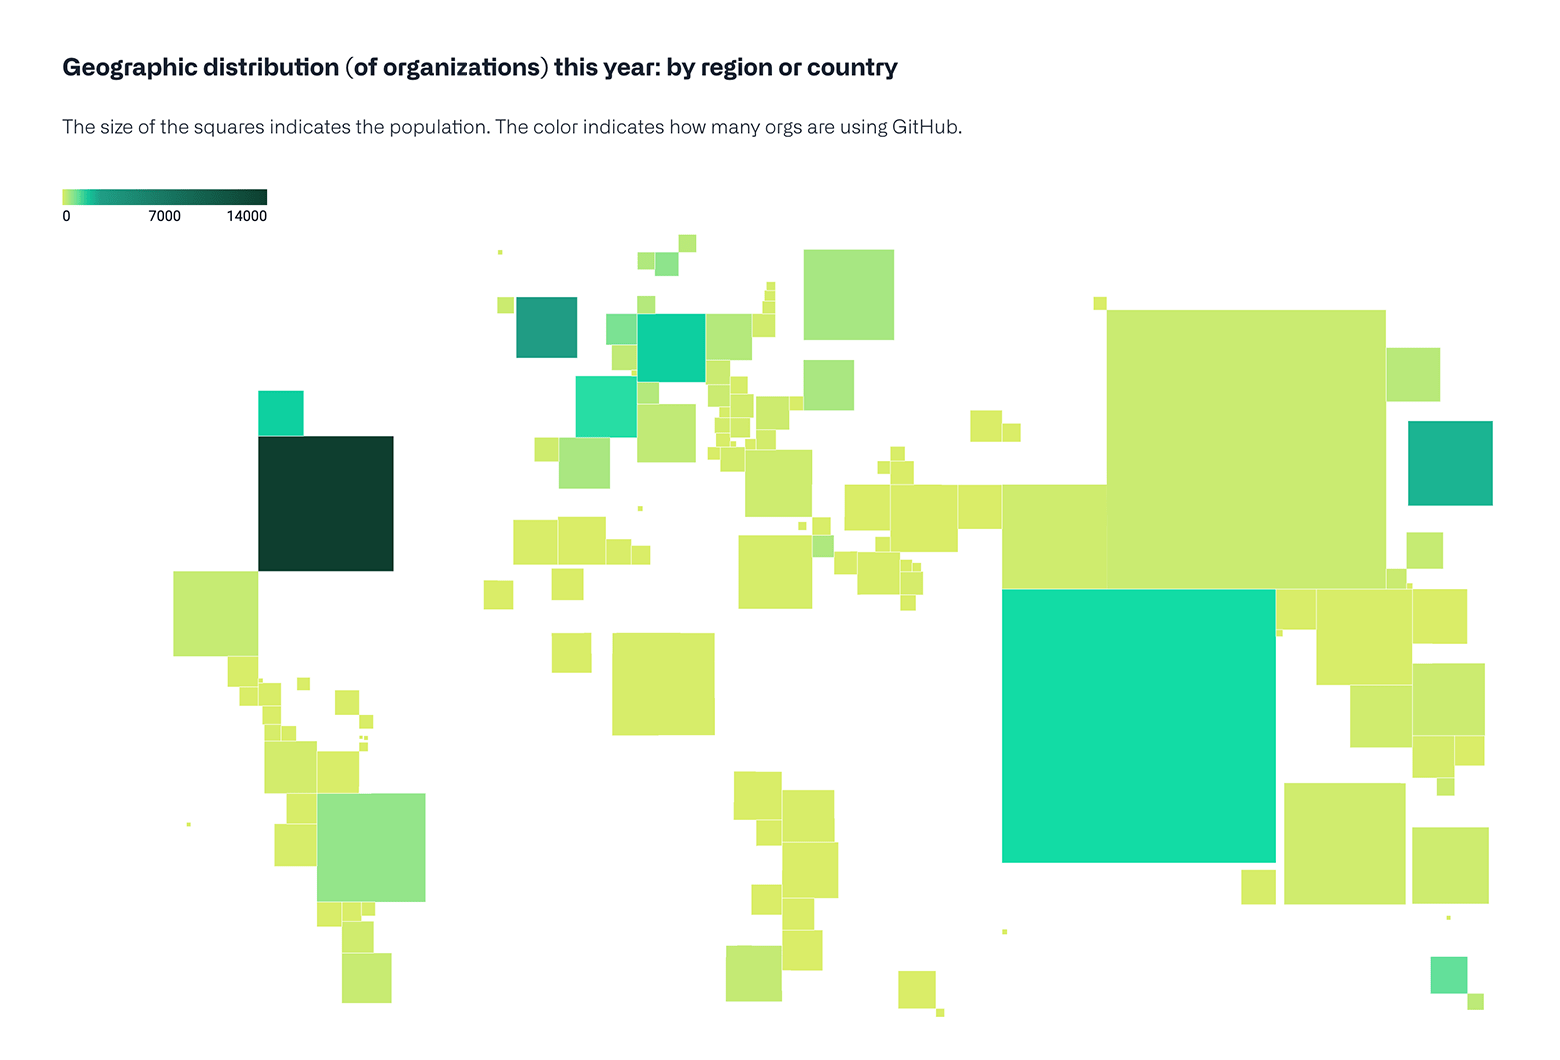 A population cartogram for GitHub's Octoverse report represents the geographical distribution of organizations in 2021. This map alters the reality of physical location in order to better visualize a particular factor, in this case business. The saturation of the square's color indicates how many organizations are using GitHub, with lighter shades representing fewer and darker shades representing more.